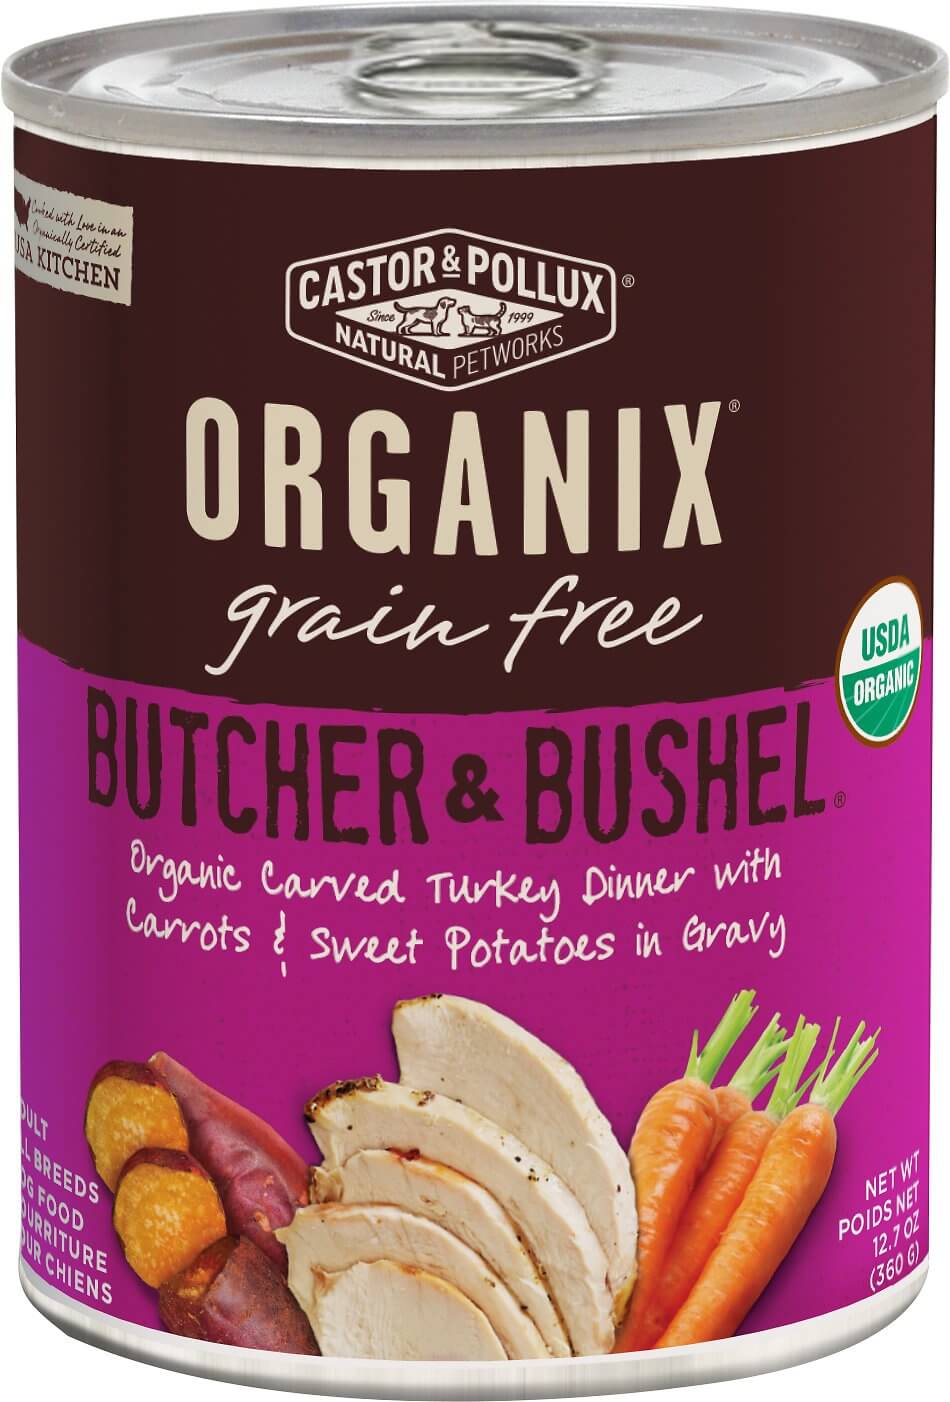 Castor and Pollux Organix Butcher and Bushel Dog Food Review (Canned)